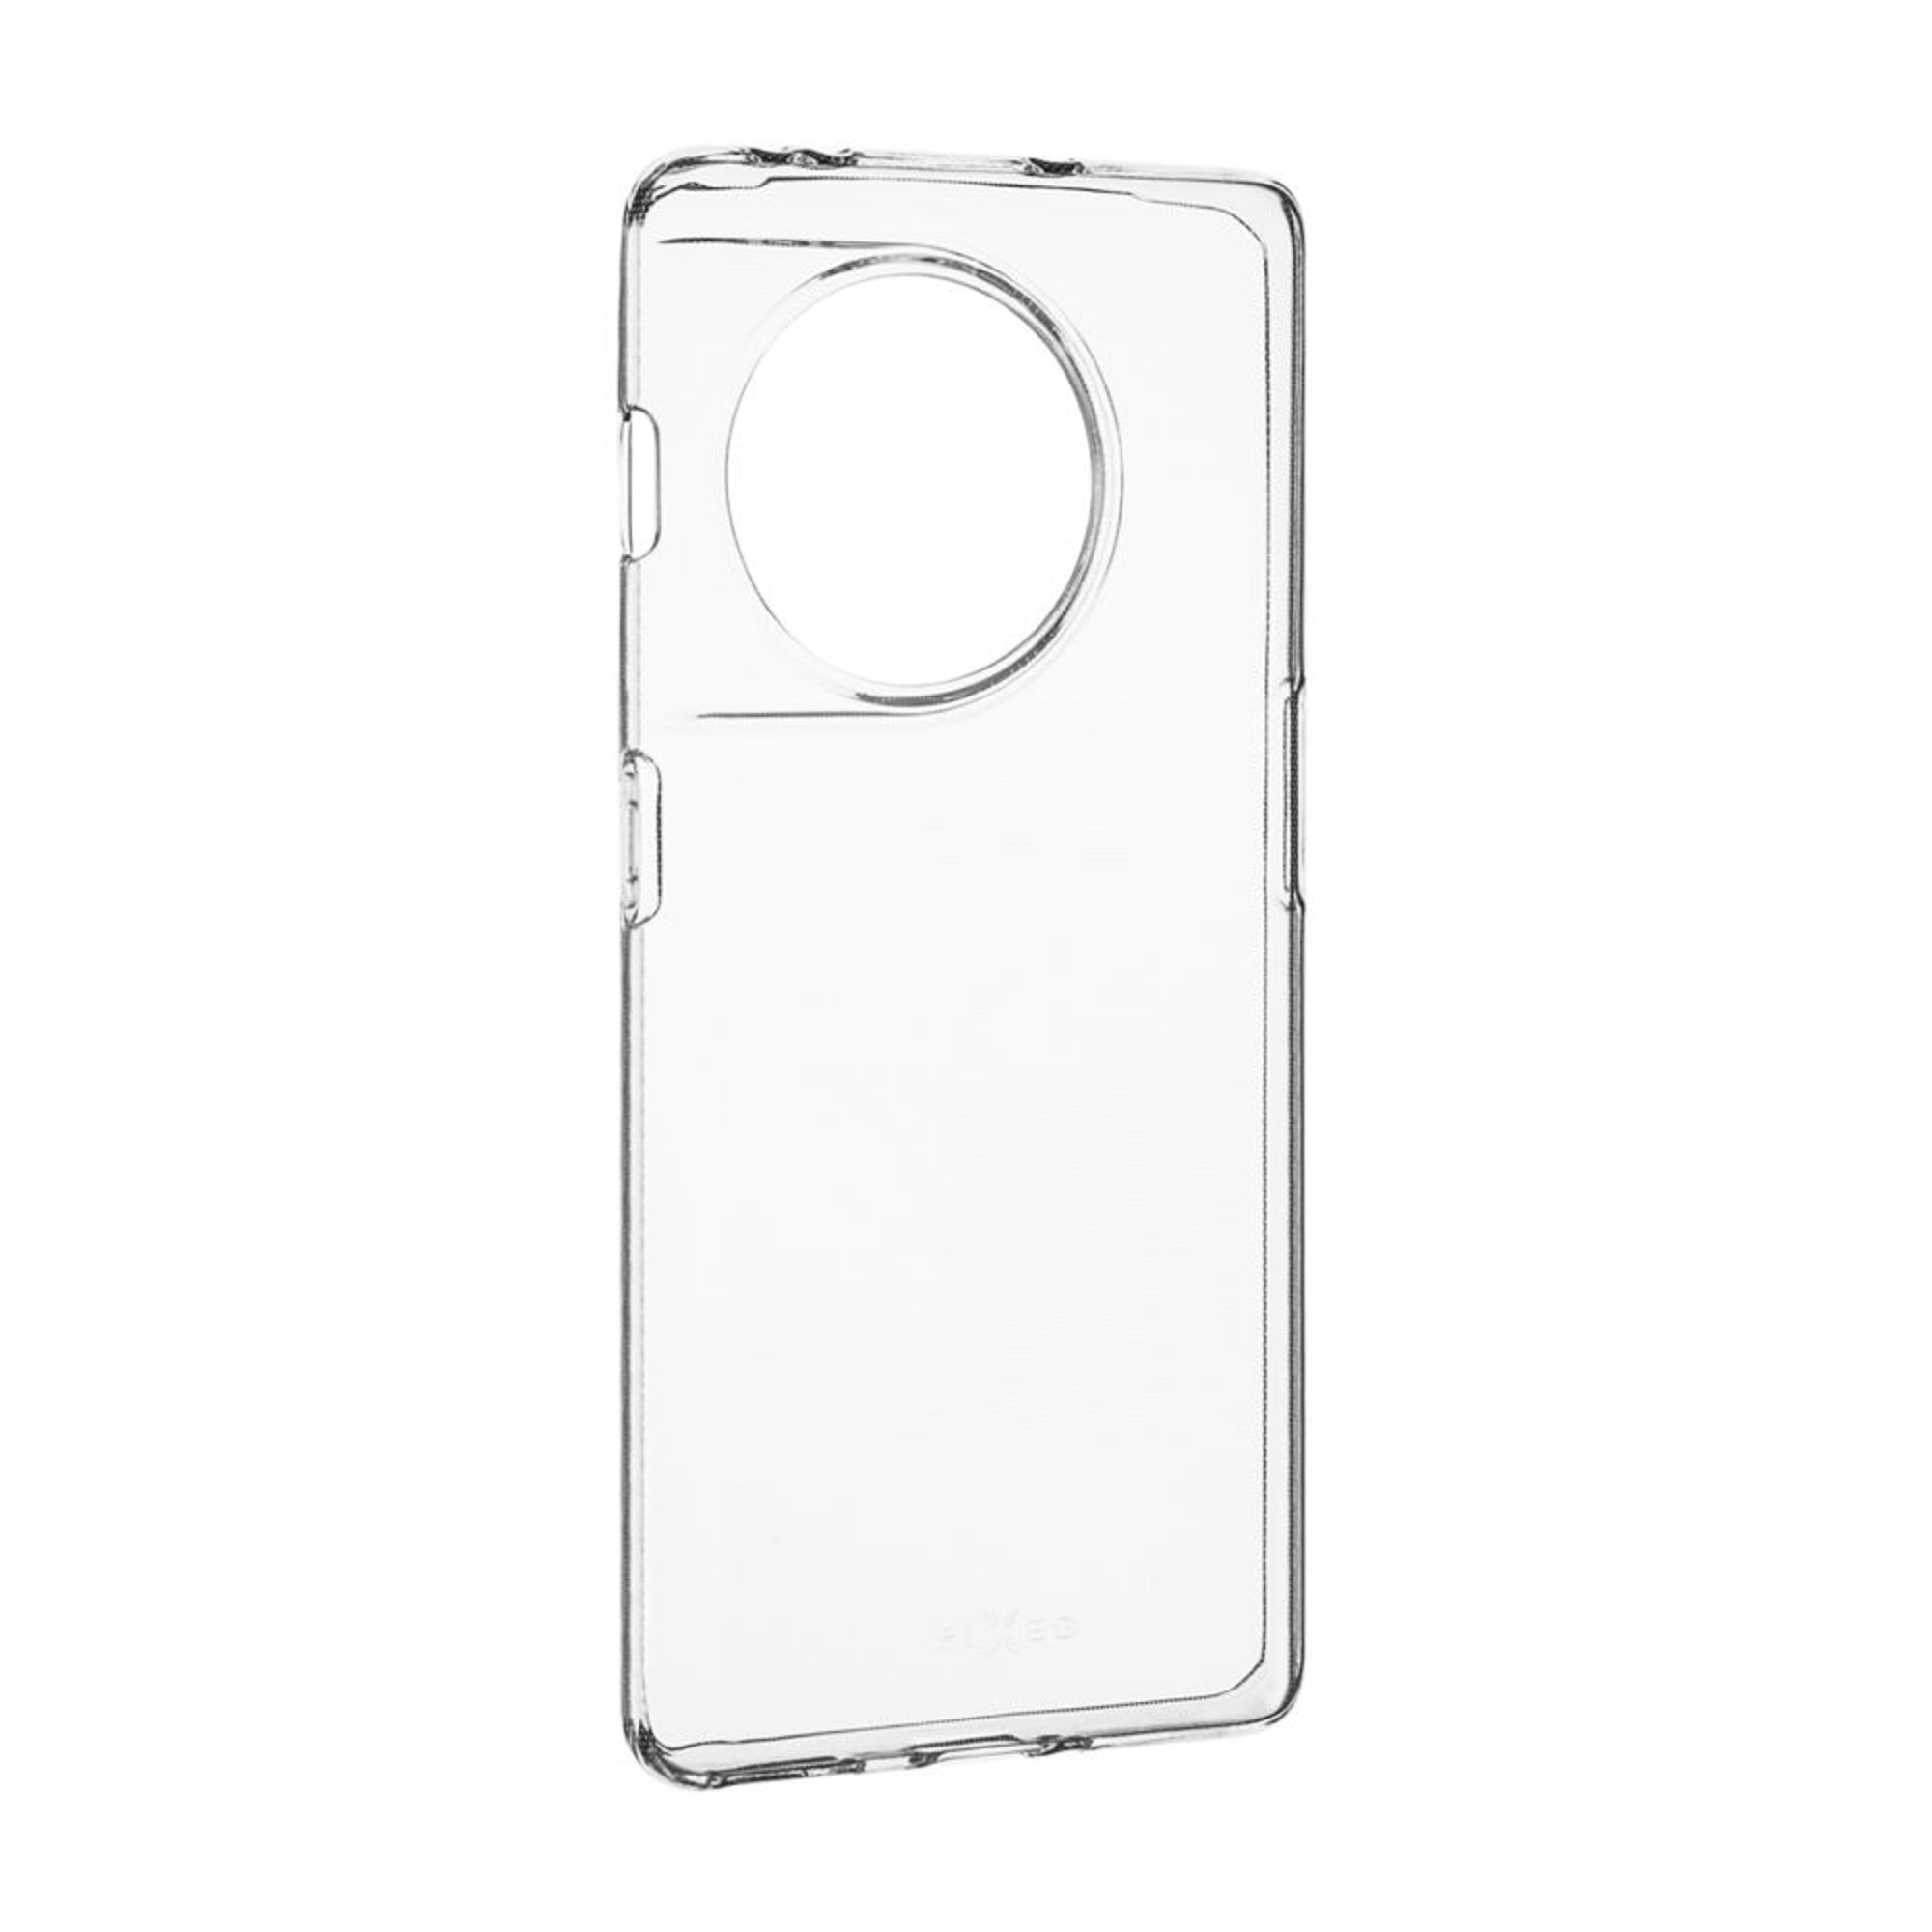 Transparent FIXTCC-1111, OnePlus, FIXED 5G, Backcover, 11R